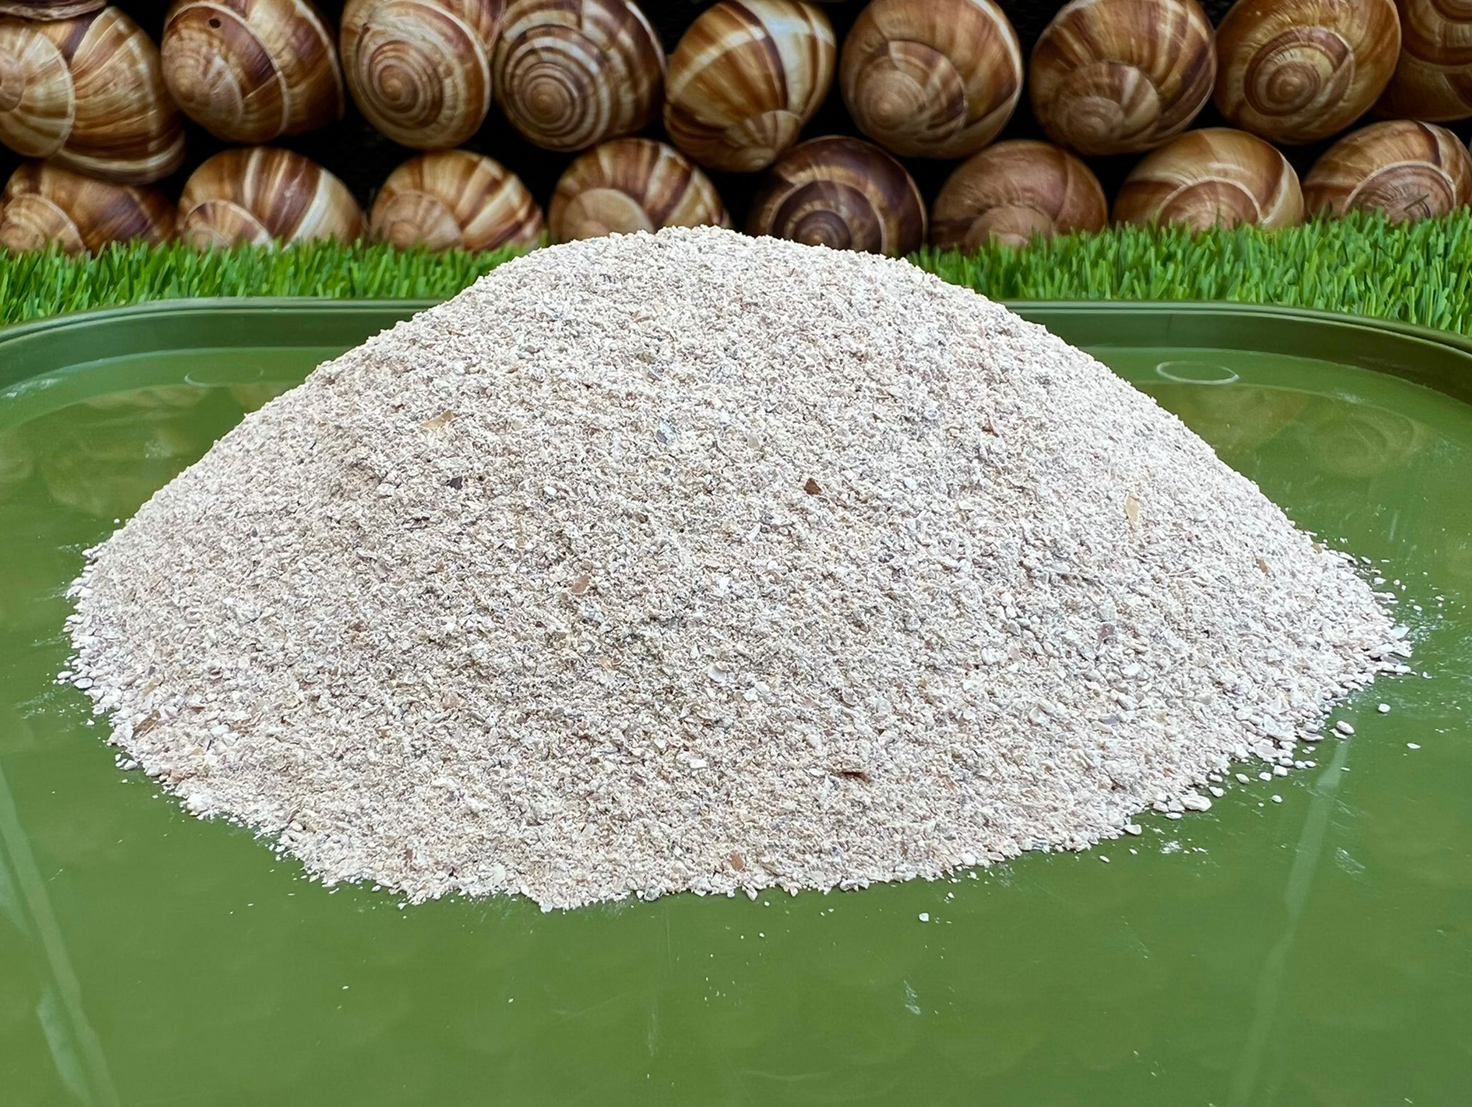 Picture of powdered snail shells